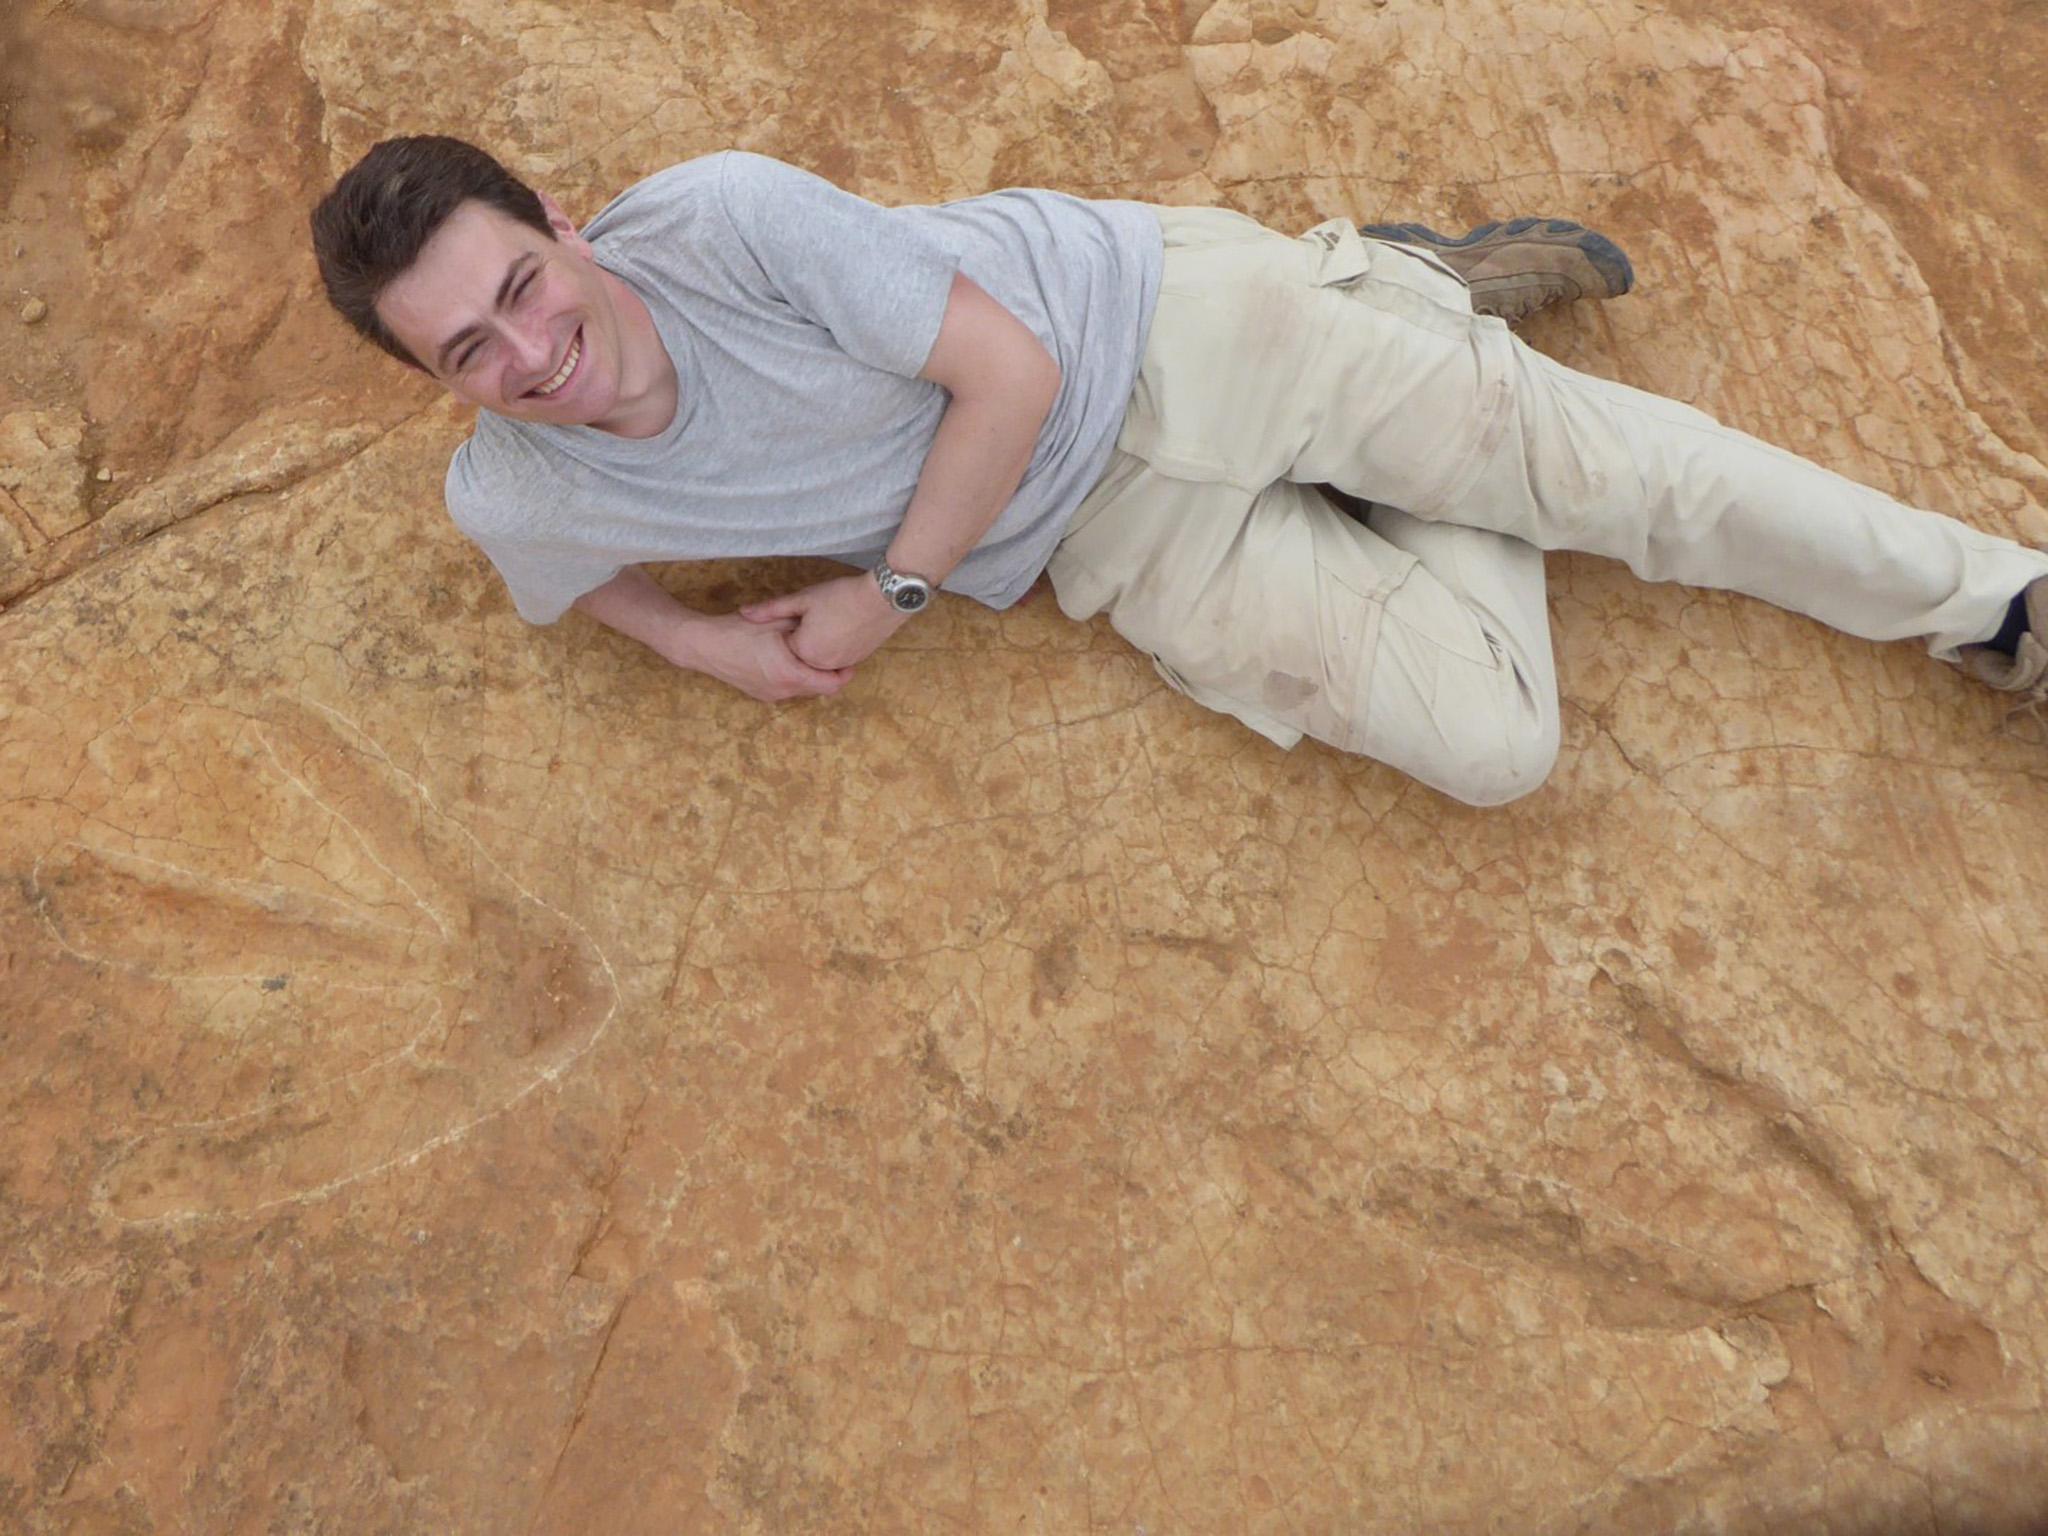 Dr Fabien Knoll from the University of Manchester poses with the footprints in South Africa